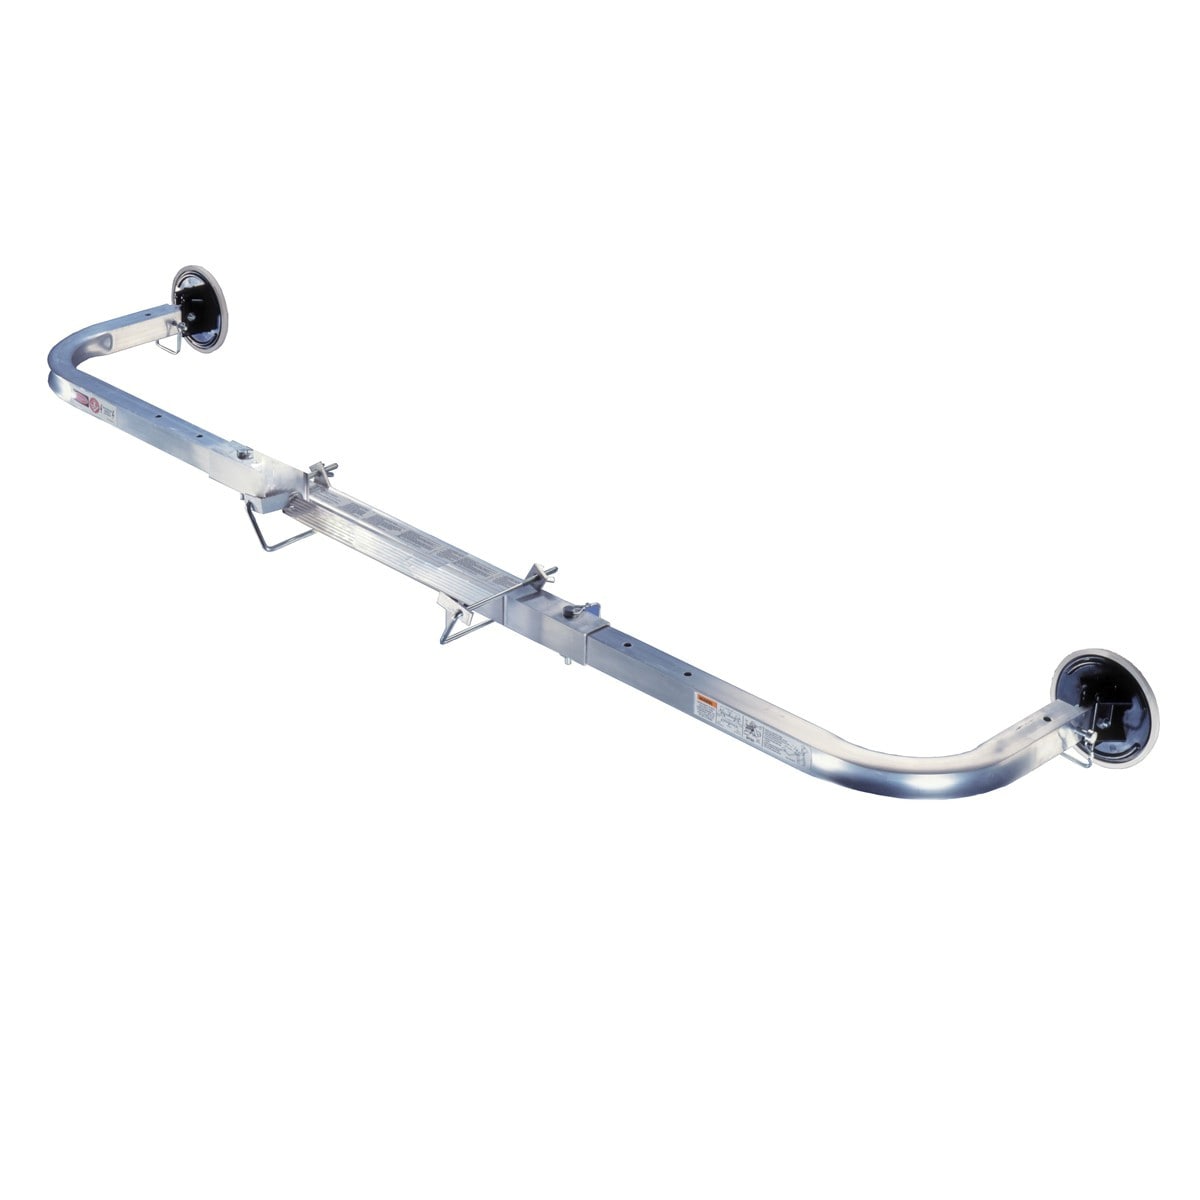 Ladder Levelers Stabilizer (Permanent Mount Style)